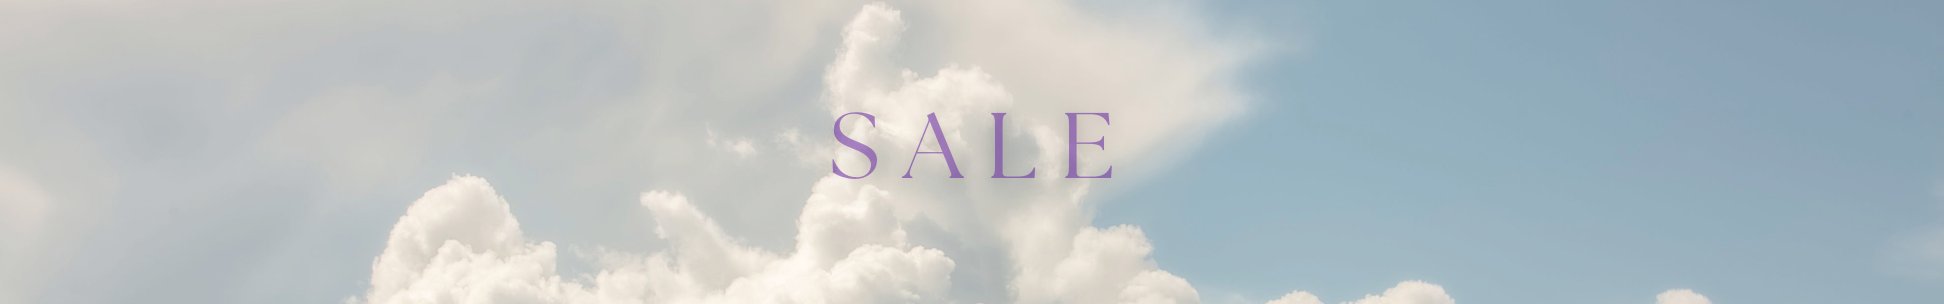 SALE over white fluffy clouds